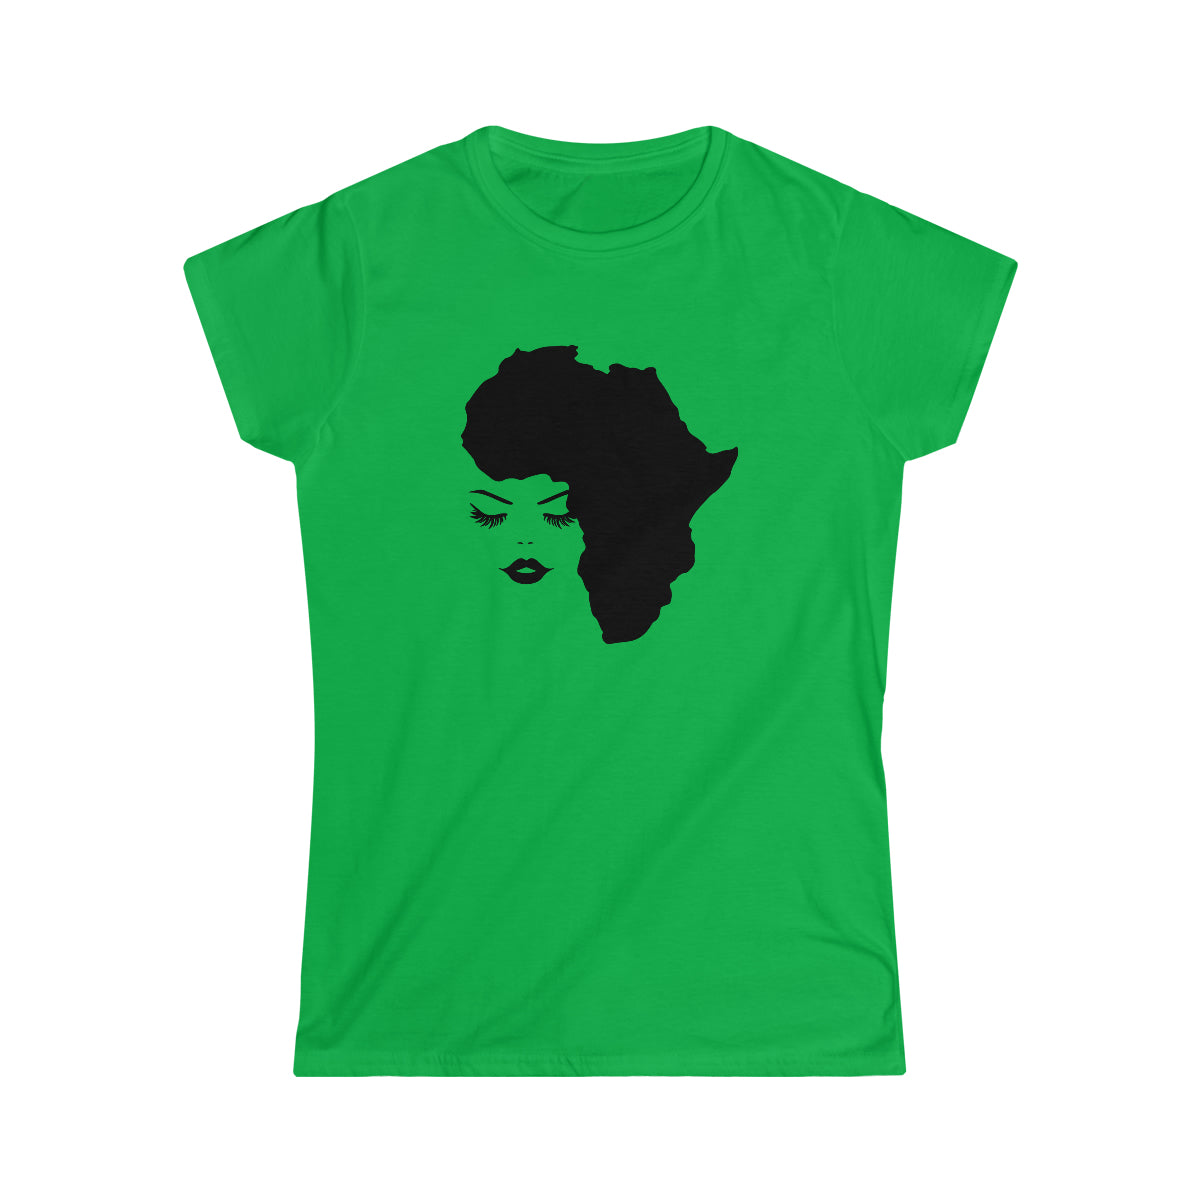 Lady Africa Women's Softstyle Tee